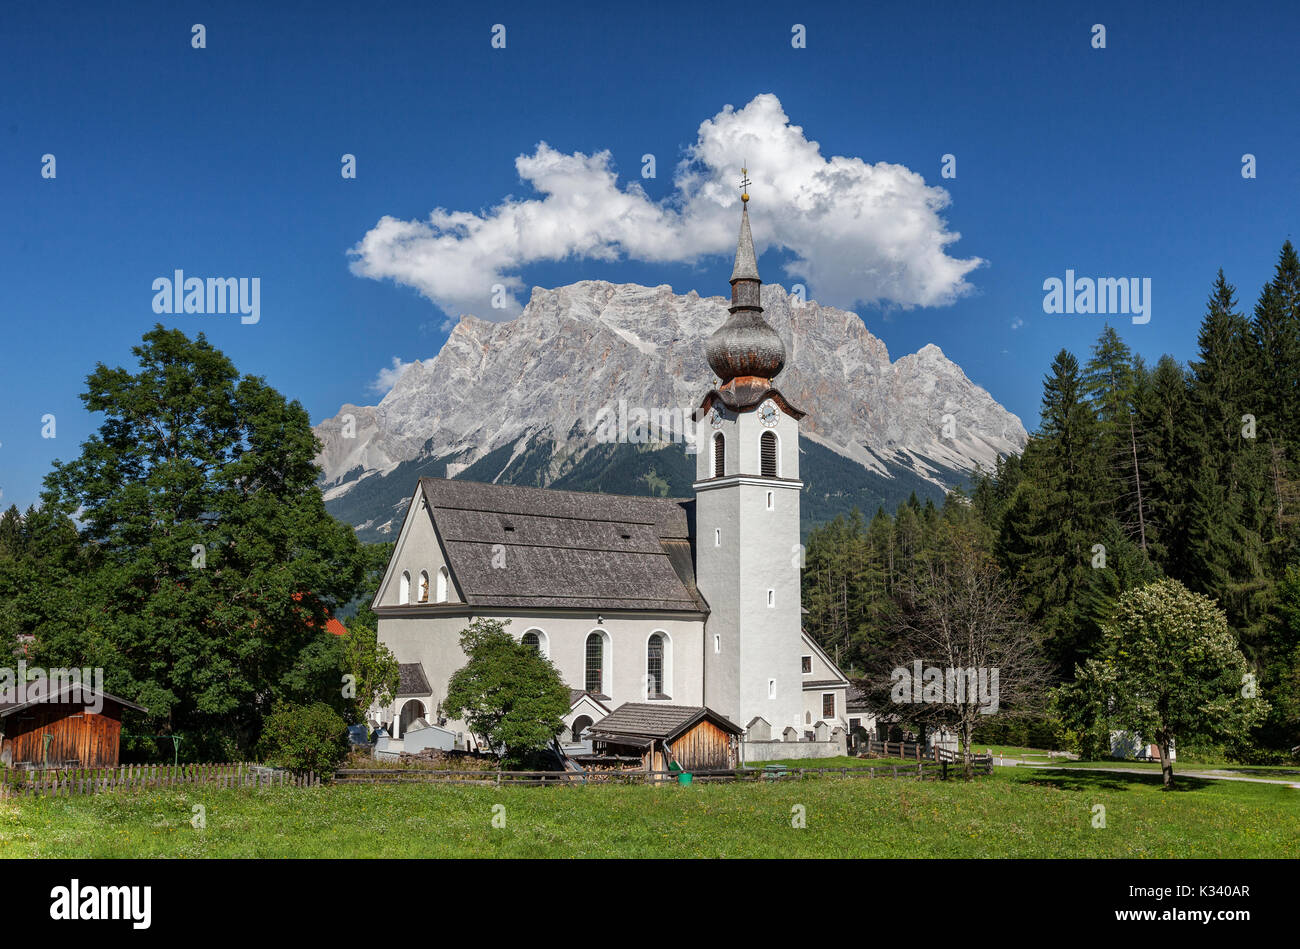 Typical church of alpine village surrounded by peaks and woods Garmisch Partenkirchen Oberbayern region Bavaria Germany Europe Stock Photo